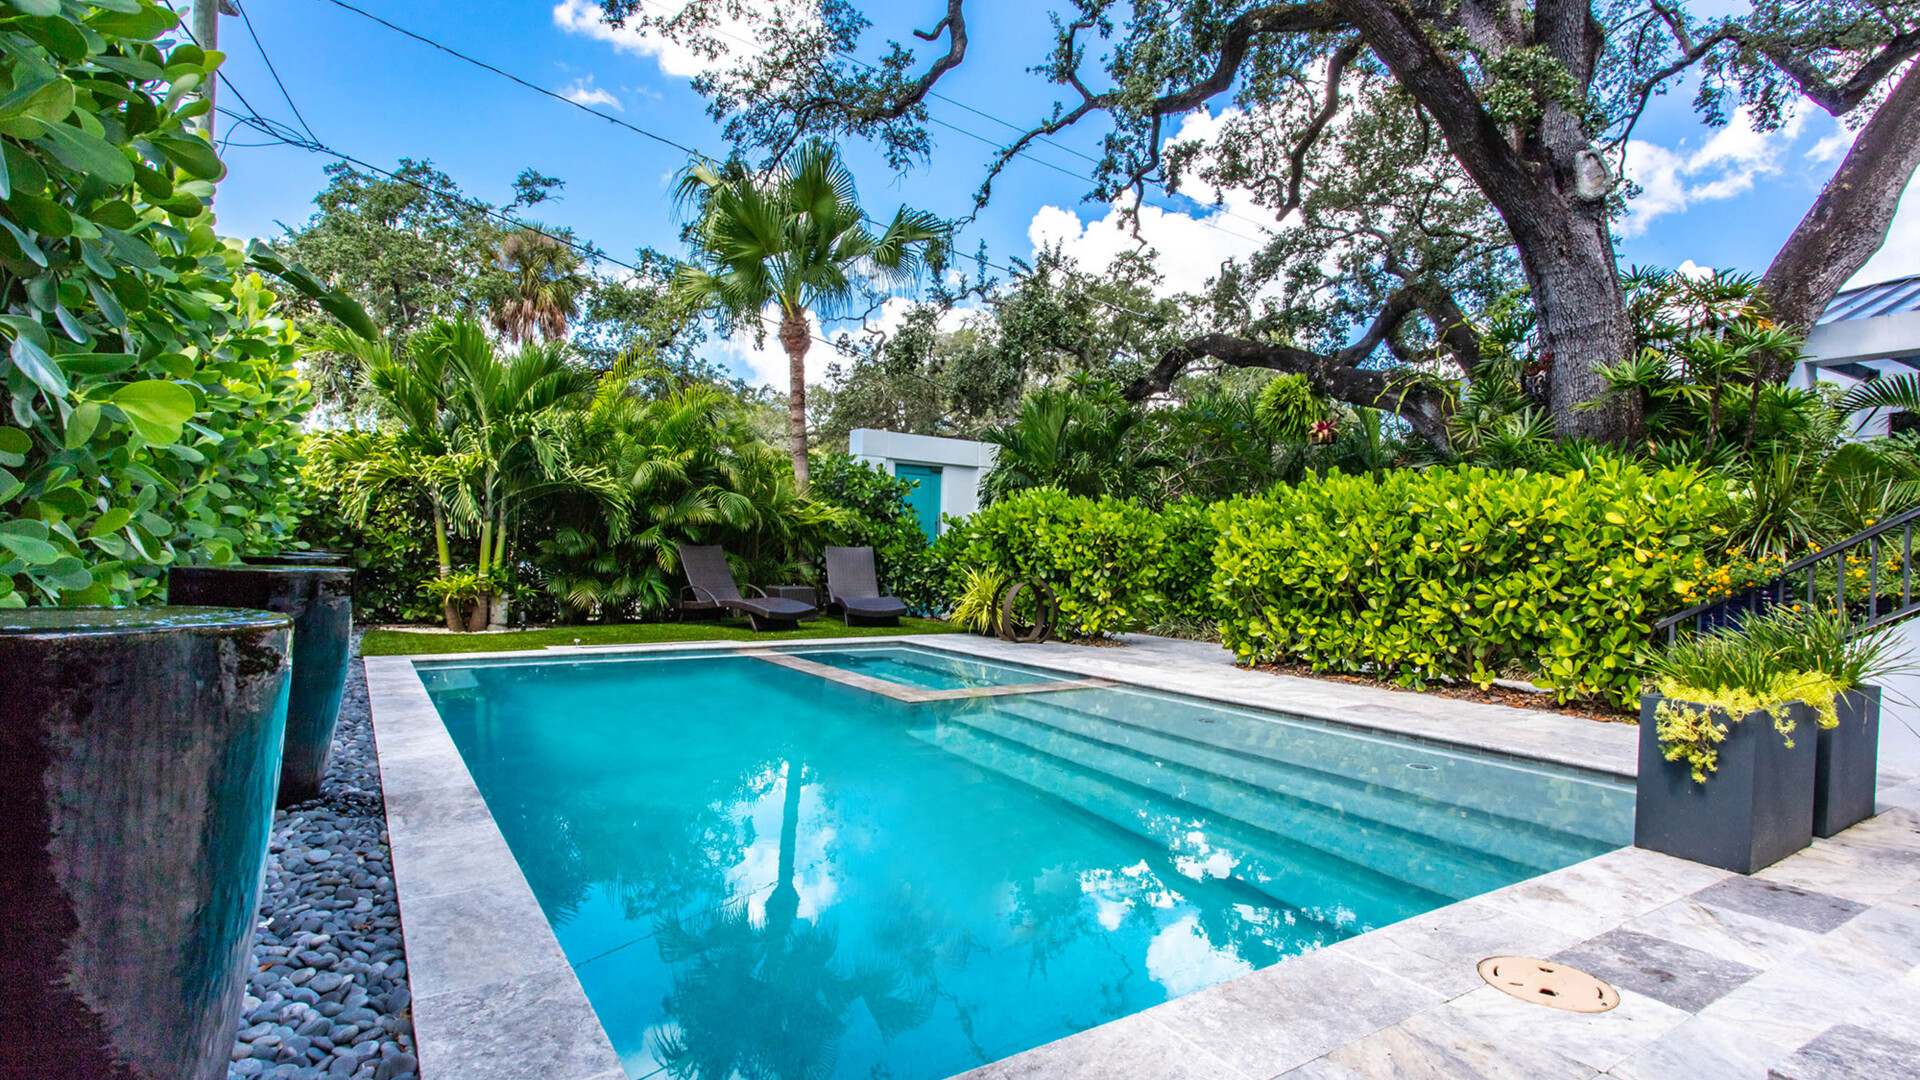 Luxury custom home featuring an infinity pool and hot tub, St. Petersburg FL